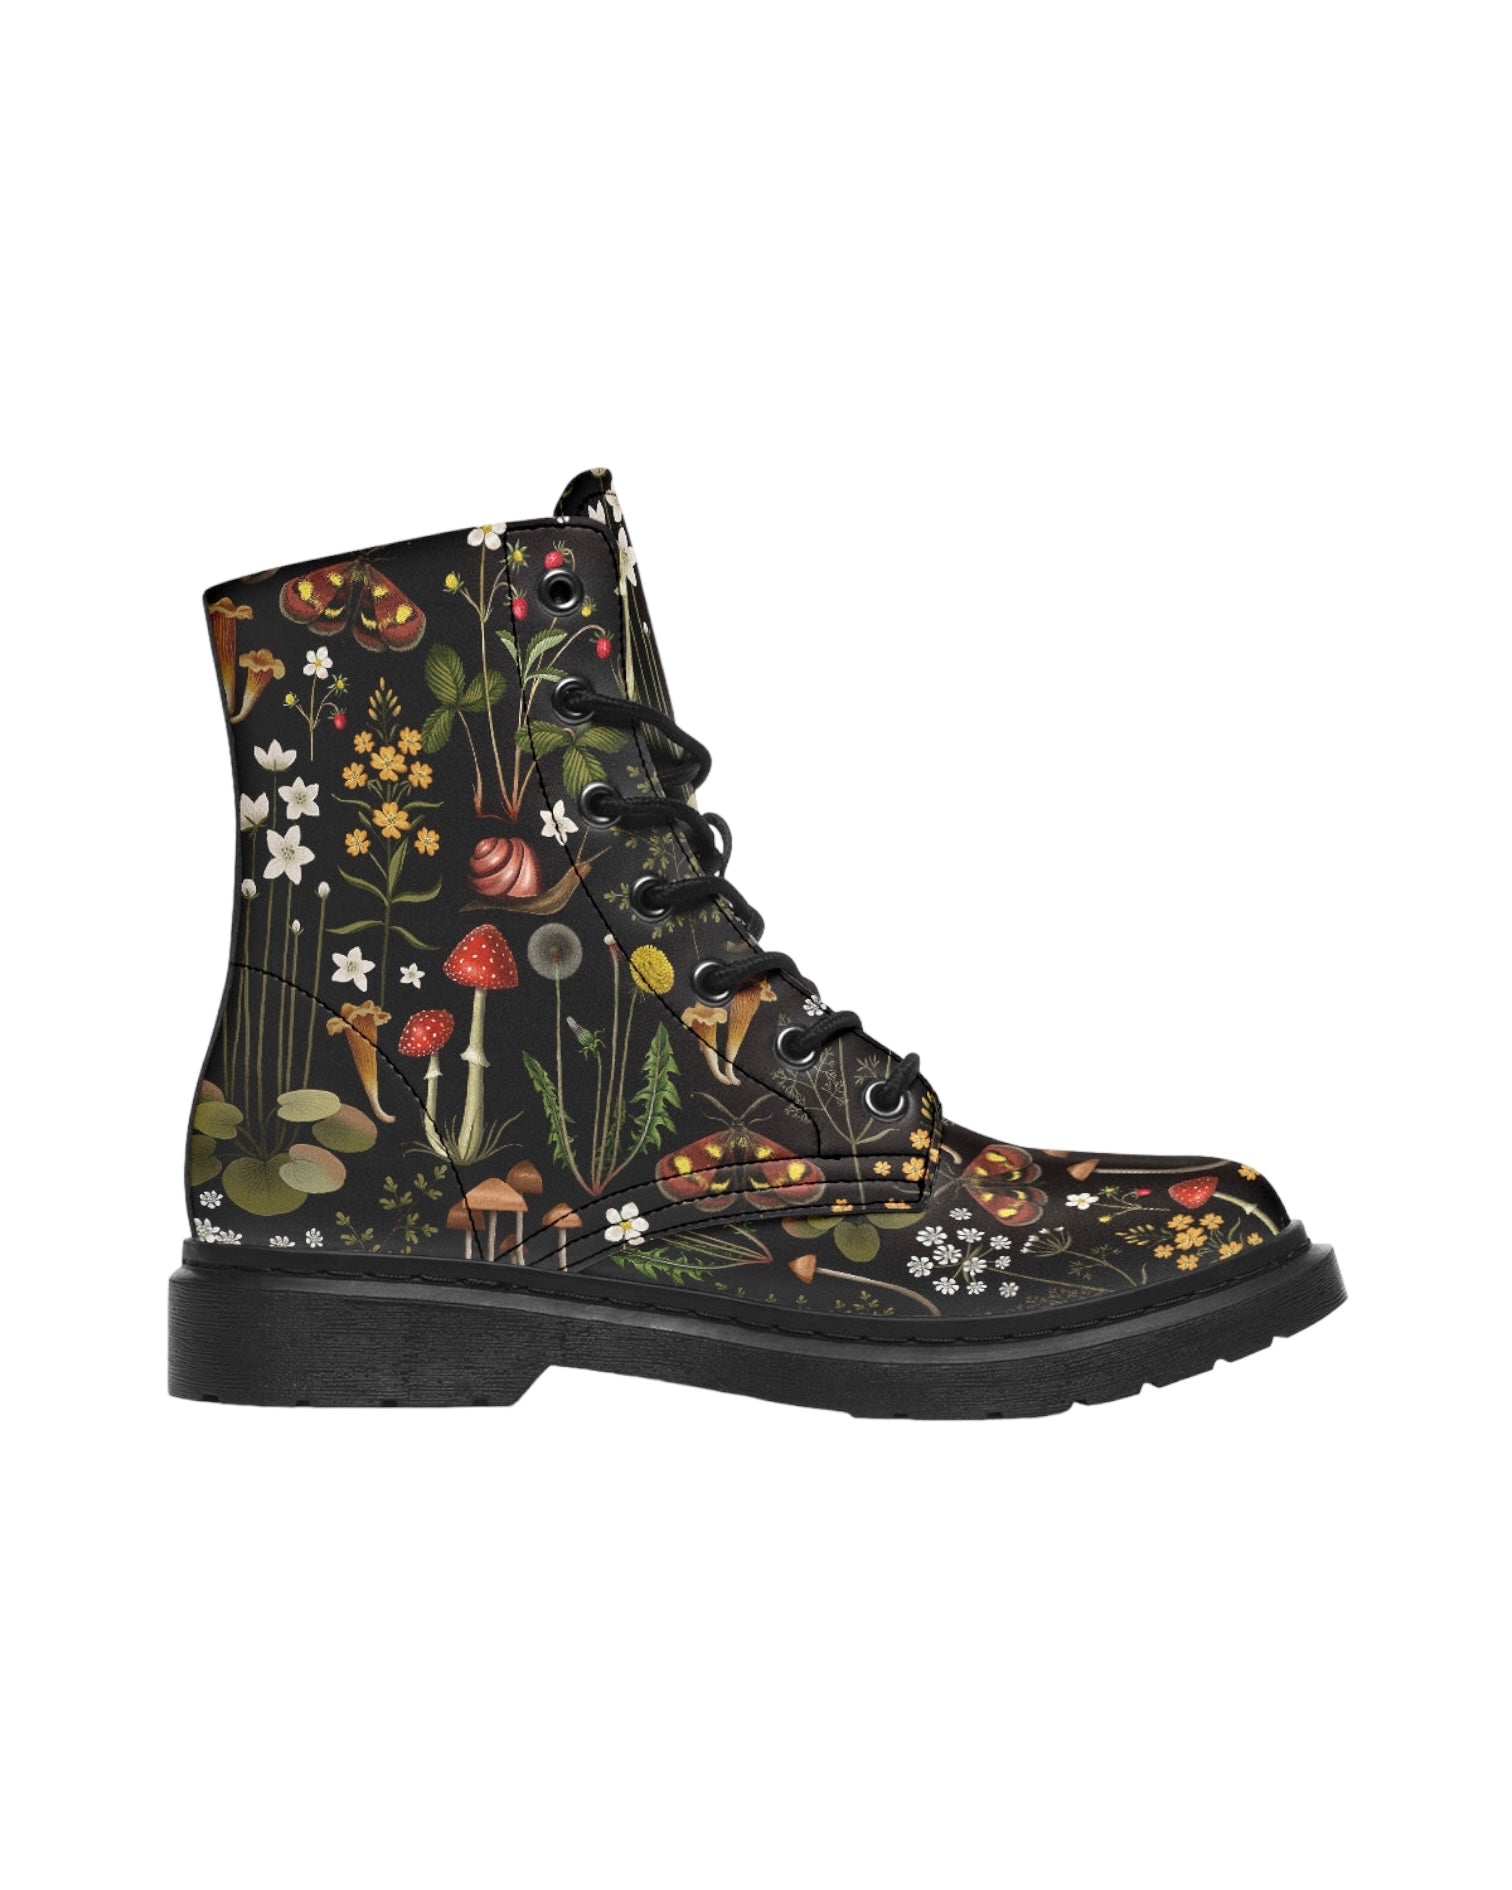 Forest Combat Festival Boots